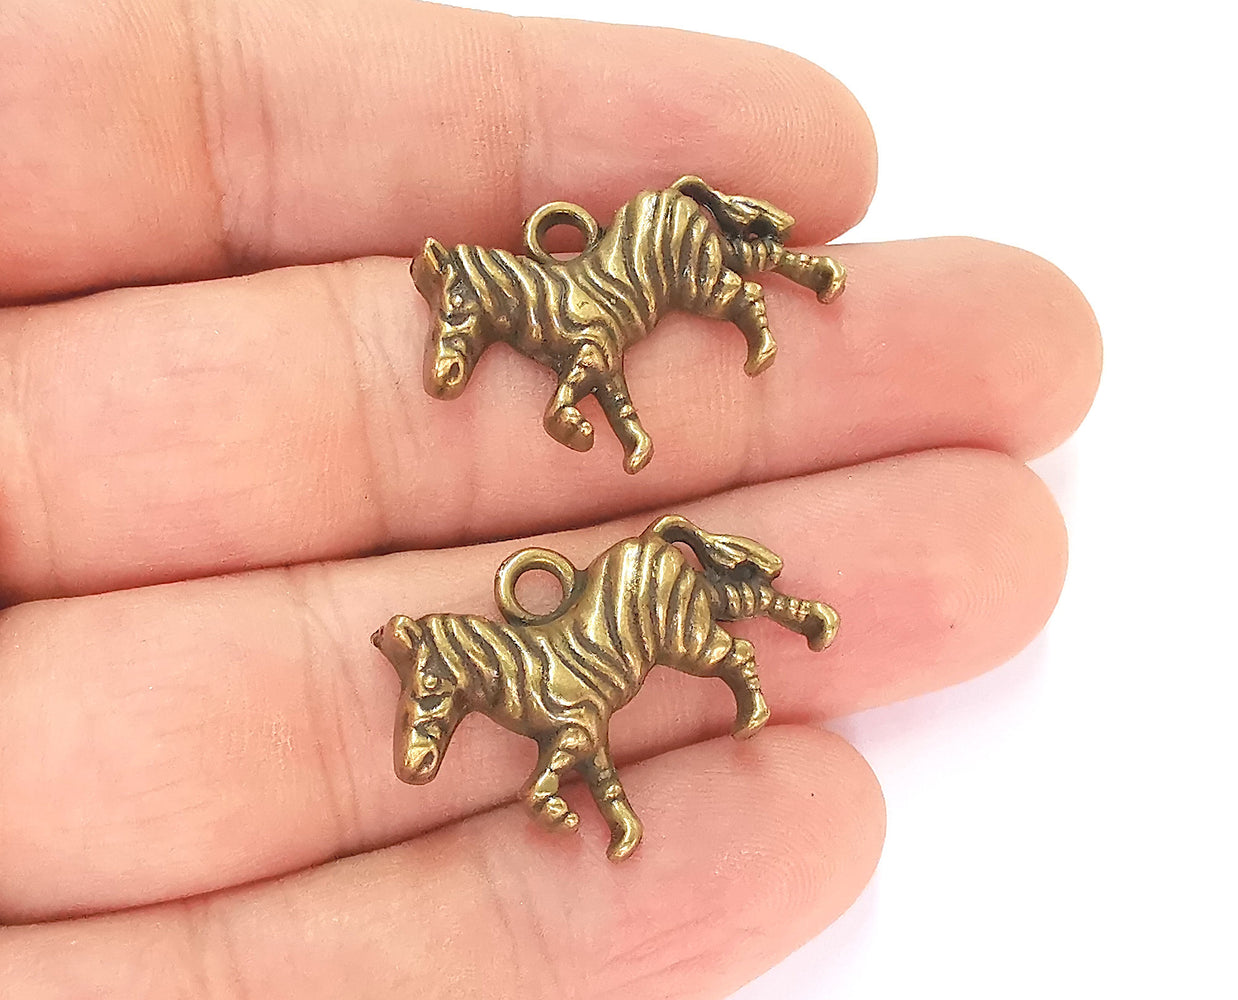 4 Zebra Charms Antique Bronze Plated Charms (30x20mm)  G23258